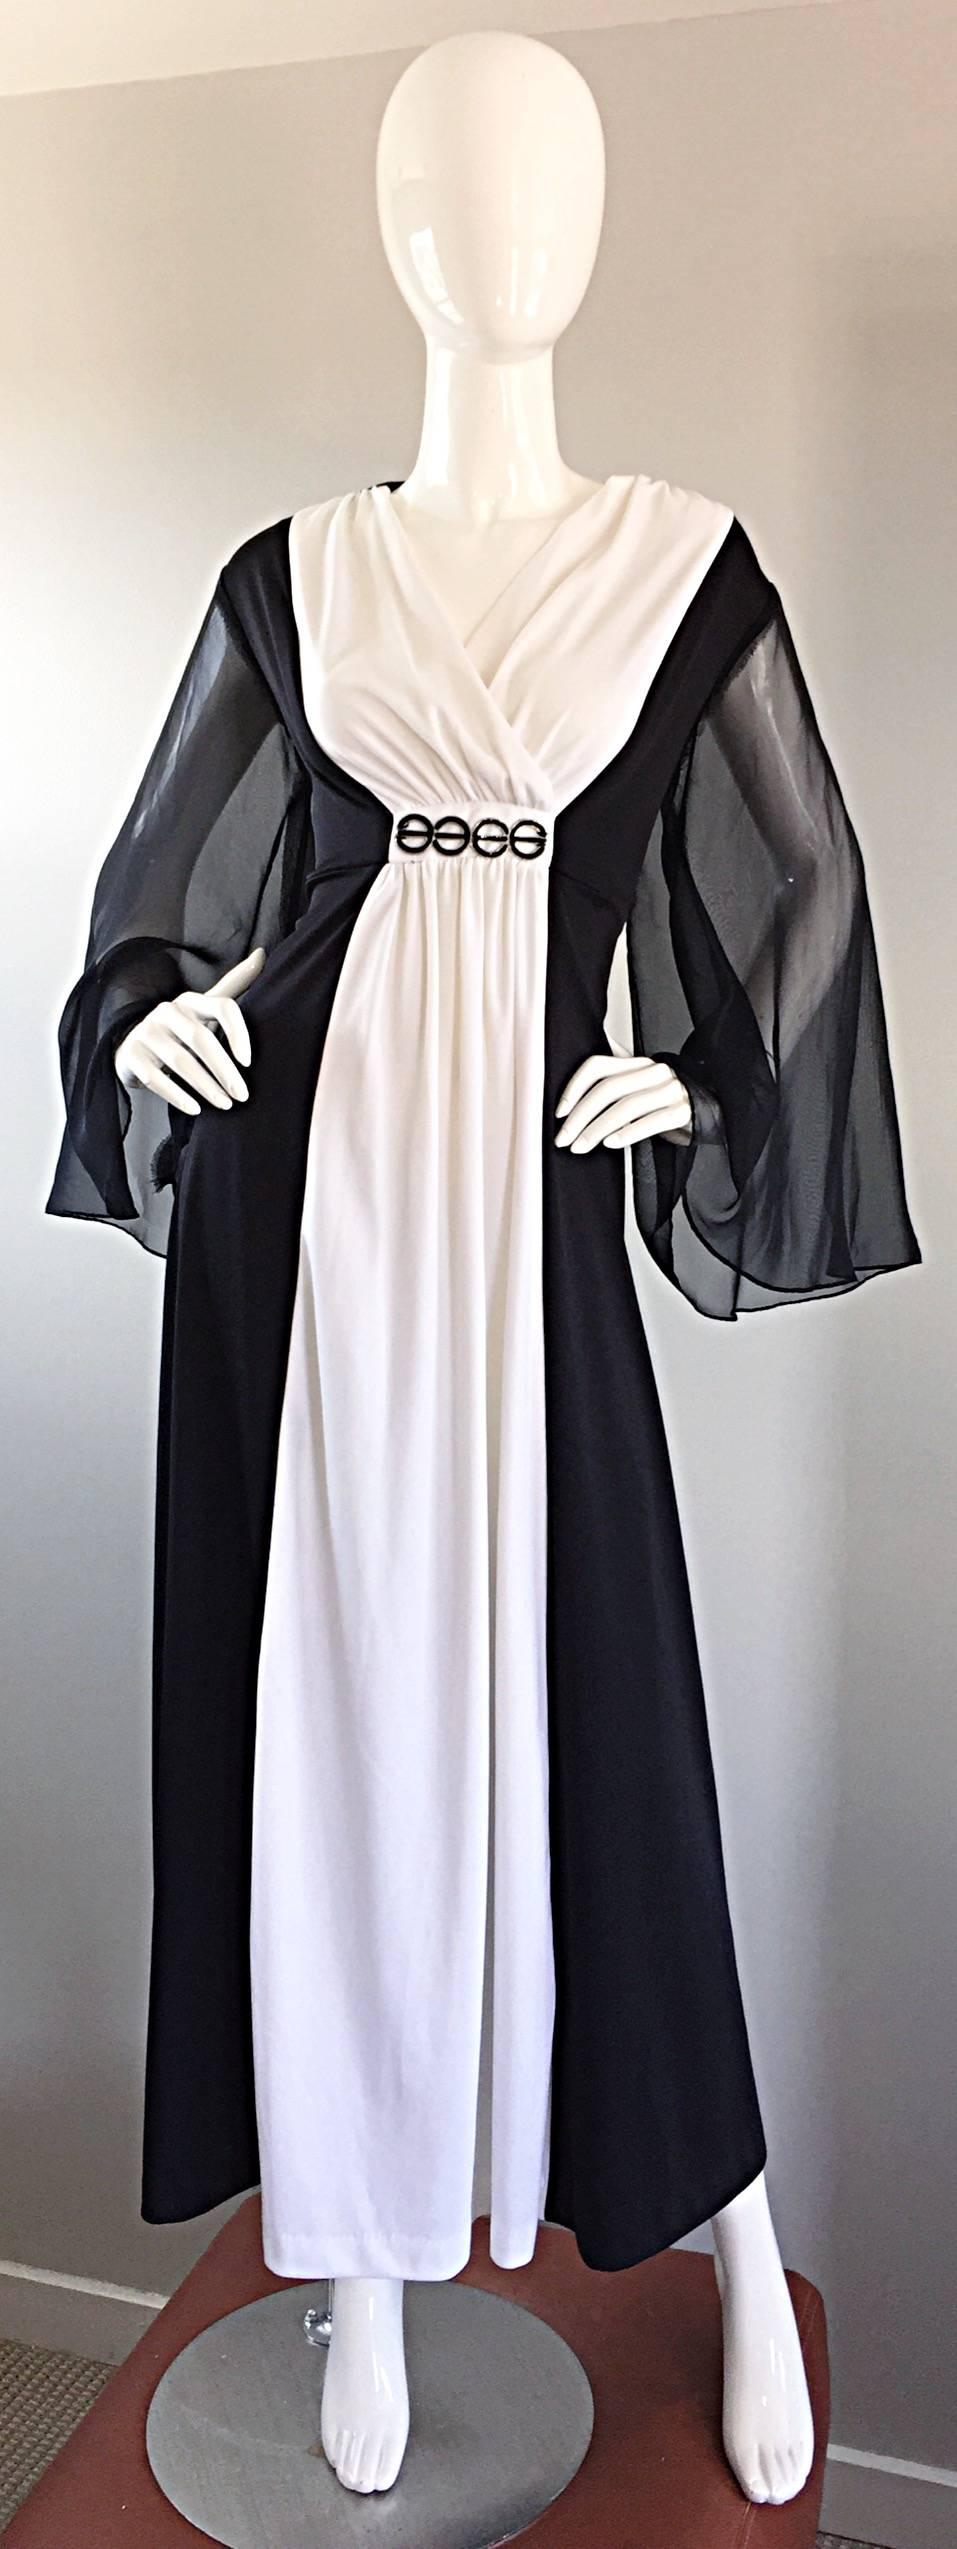 Amazing 1970s 70s Black and White Grecian Maxi Dress / Gown w/ Angel Sleeves In Excellent Condition For Sale In San Diego, CA